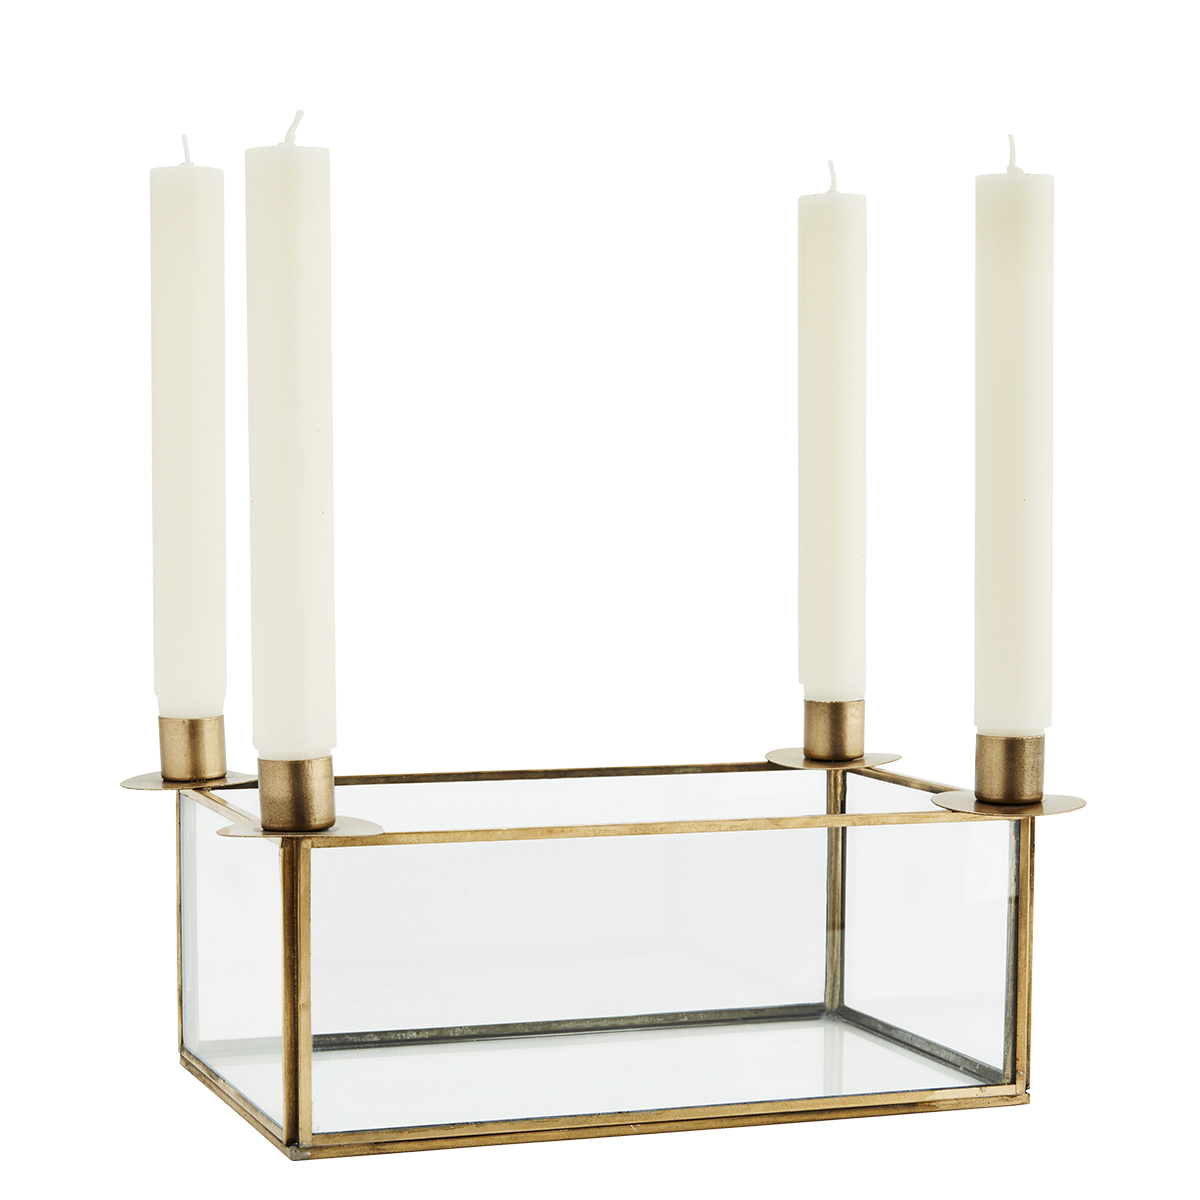 Glass box w/ candle holders